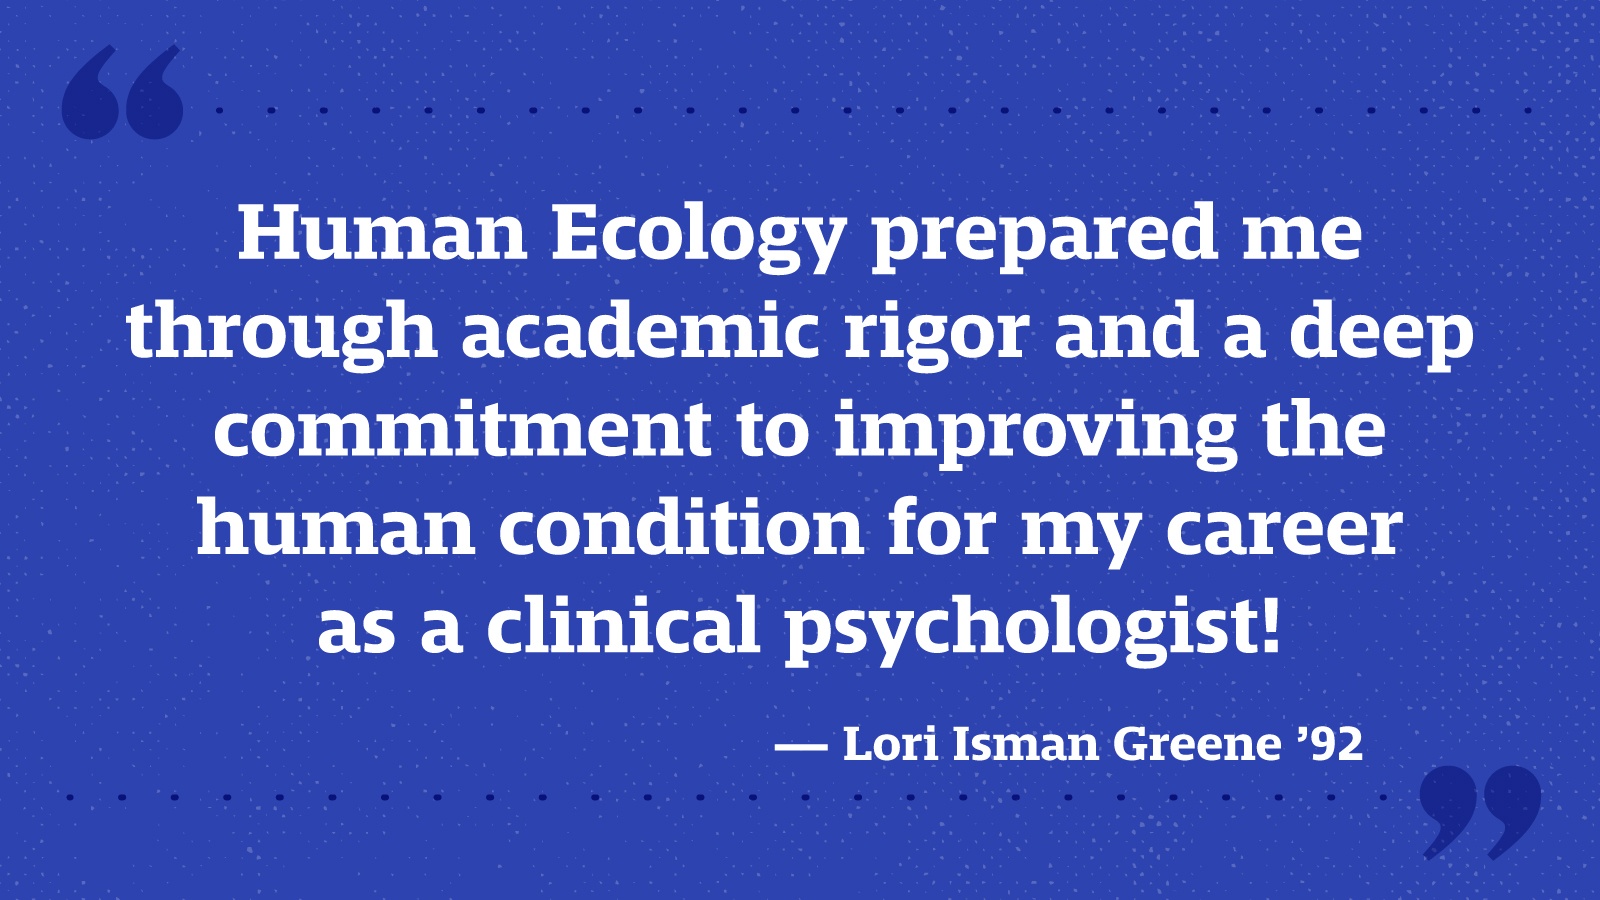 Human Ecology prepared me through academic rigor and a deep commitment to improving the human condition for my career as a clinical psychologist! — Lori Isman Greene ’92